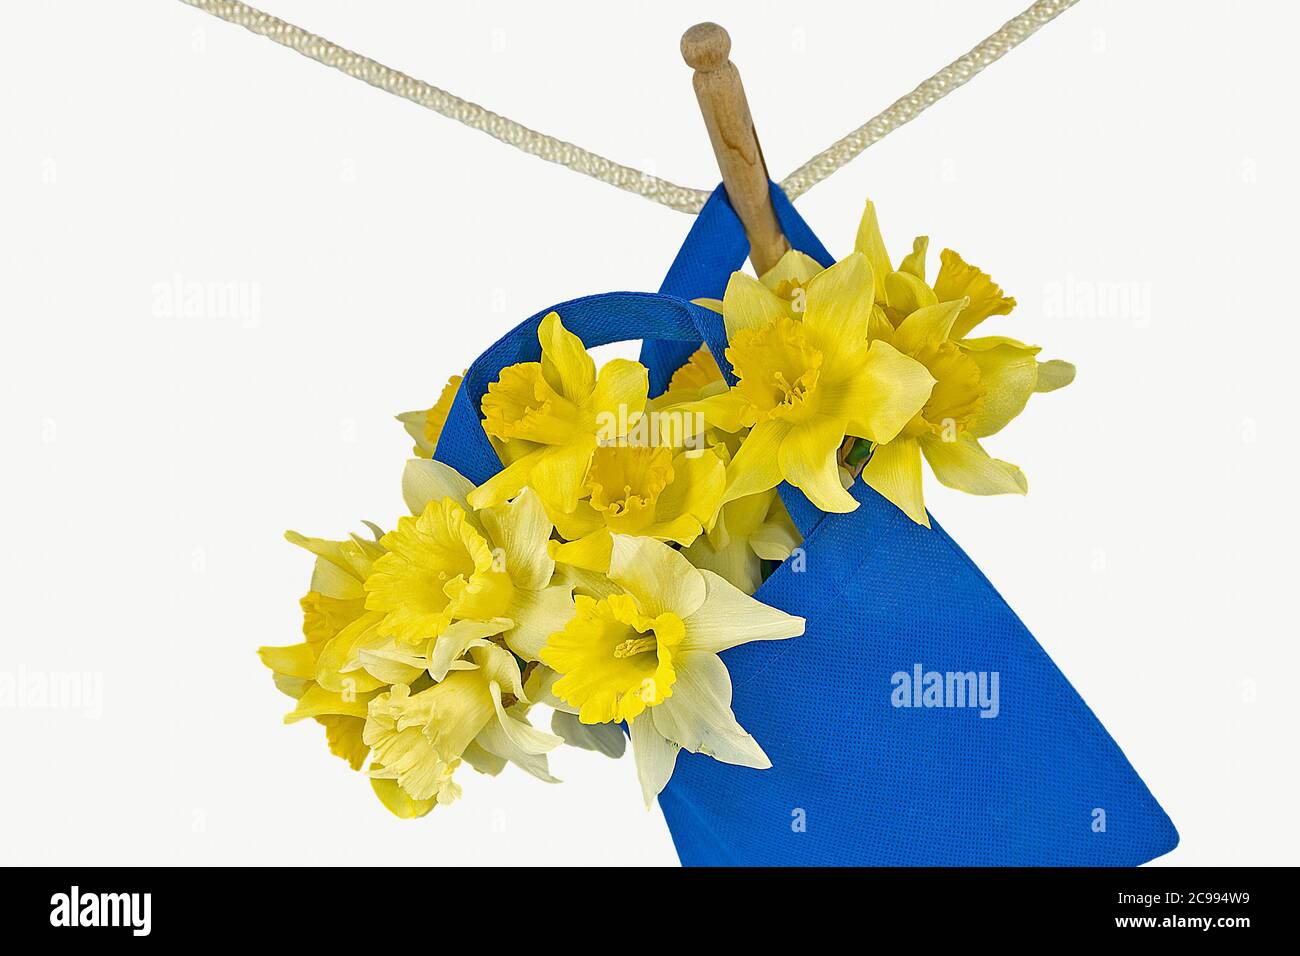 yellow daffodil bouquet in blue bag hanging from clothesline with retro wooden clothespin Stock Photo